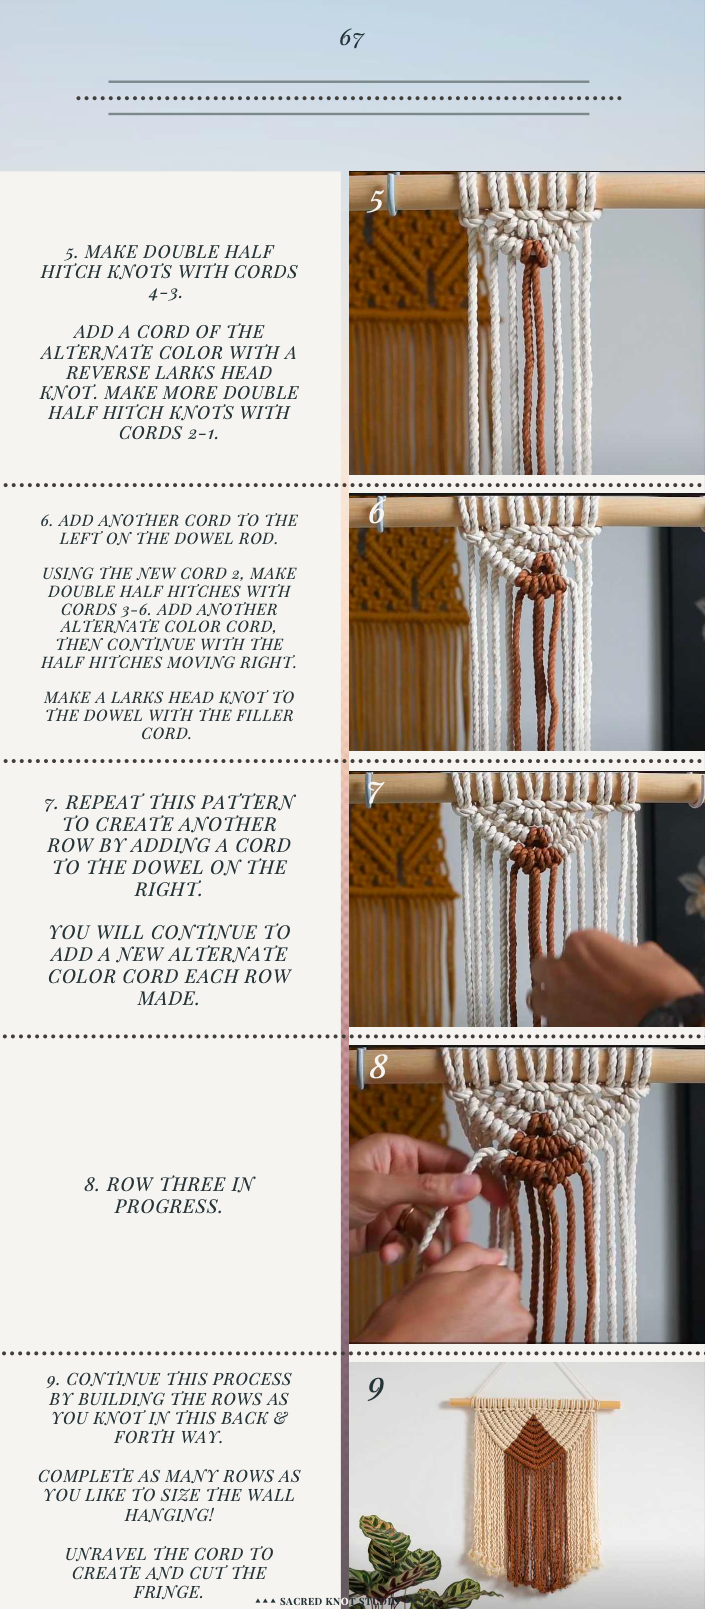 Macrame Kits for Adults Beginners: DIY Macrame Kit with 220 Yards Macrame  Cord and 58pcs Macrame Supplies. E-Book Tutorial for 5 Macrame Projects and